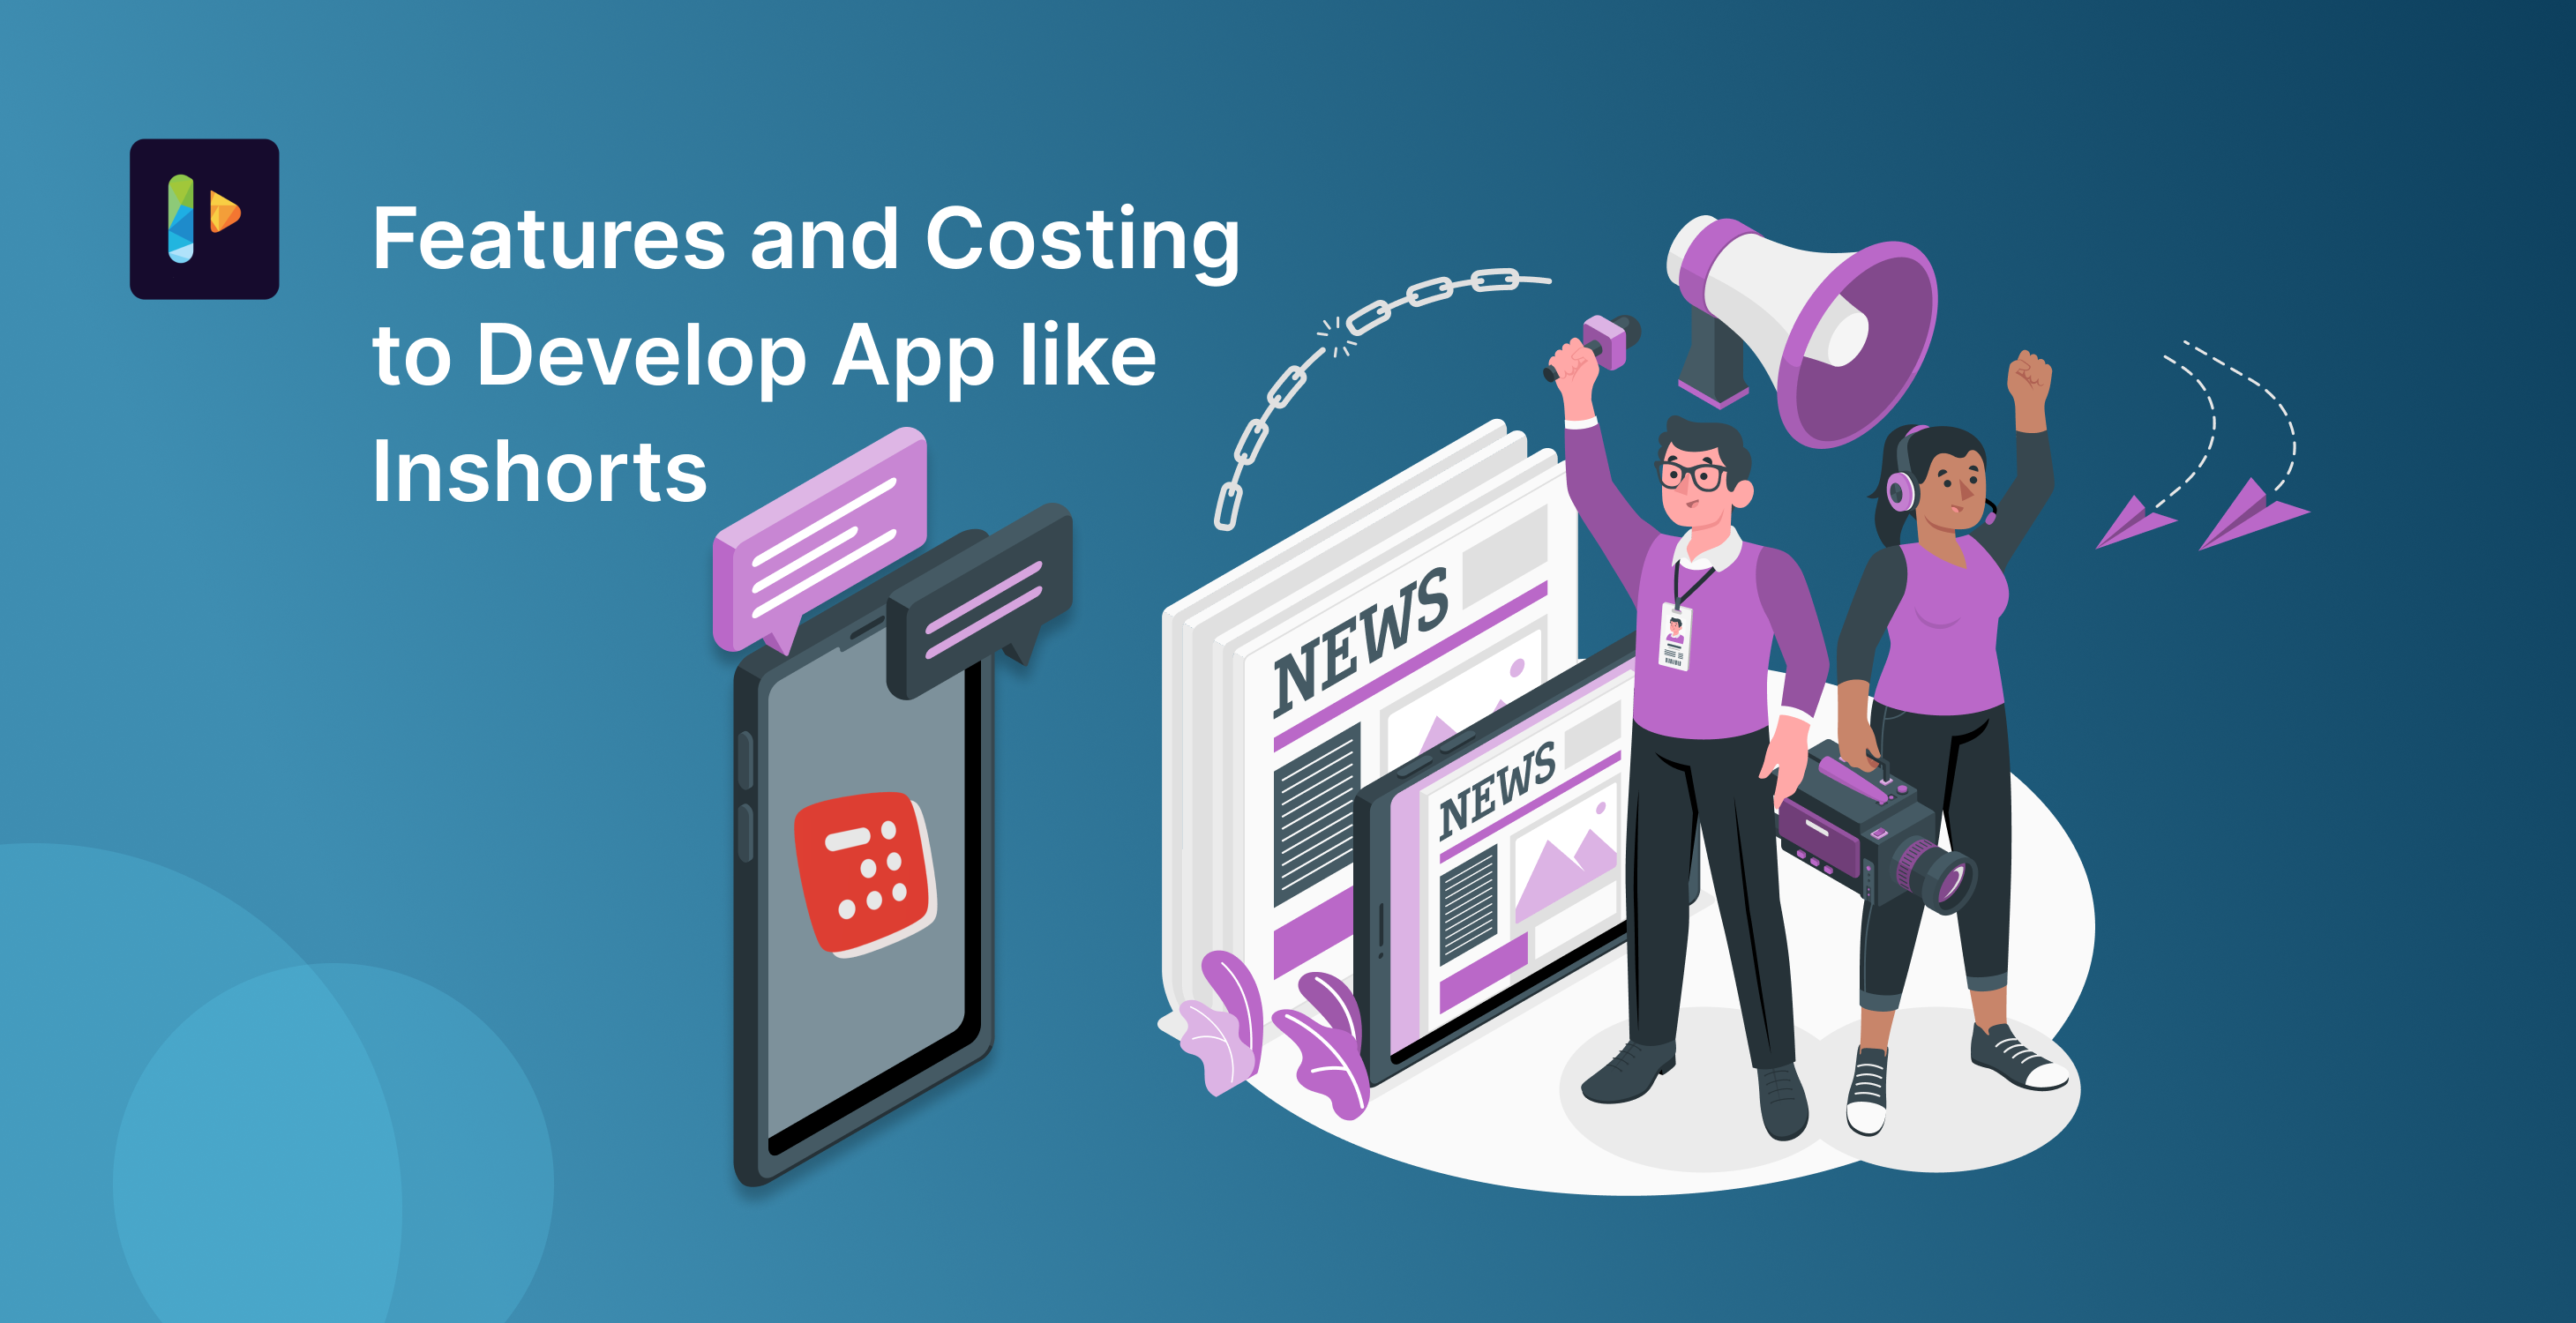 Best Features and Costing to Develop App like Inshorts in 2023